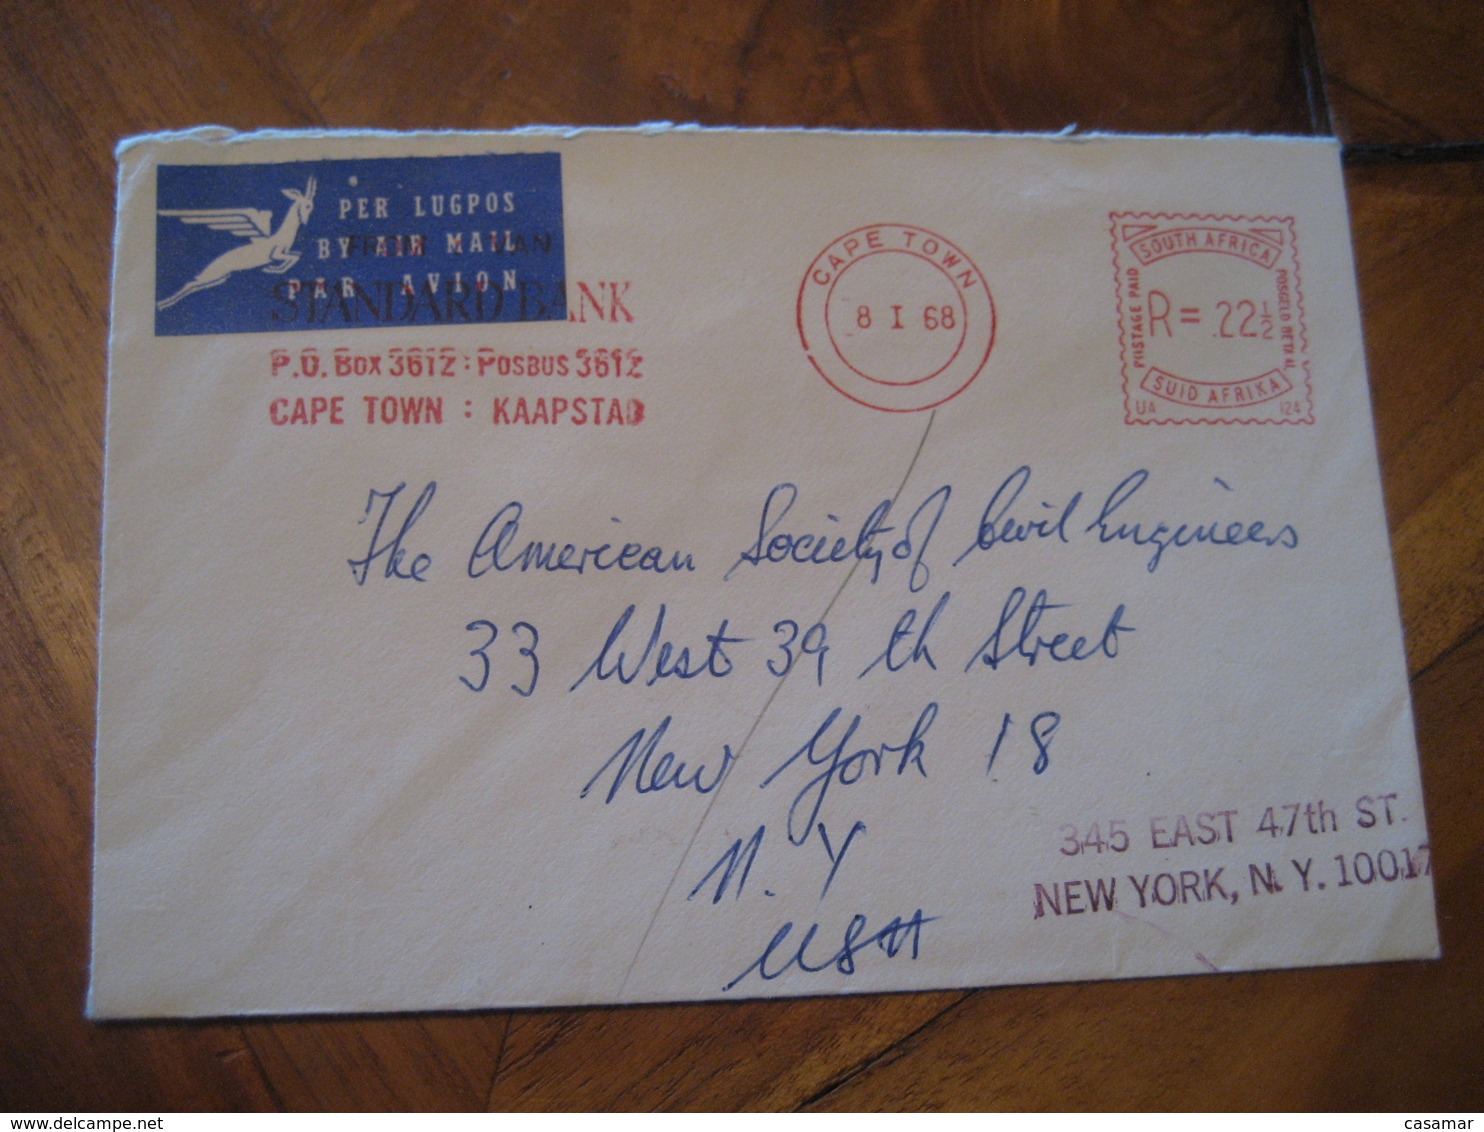 CAPE TOWN 1968 To New York USA Standard Bank Meter Mail Cancel Air Mail Cover SOUTH AFRICA - Briefe U. Dokumente